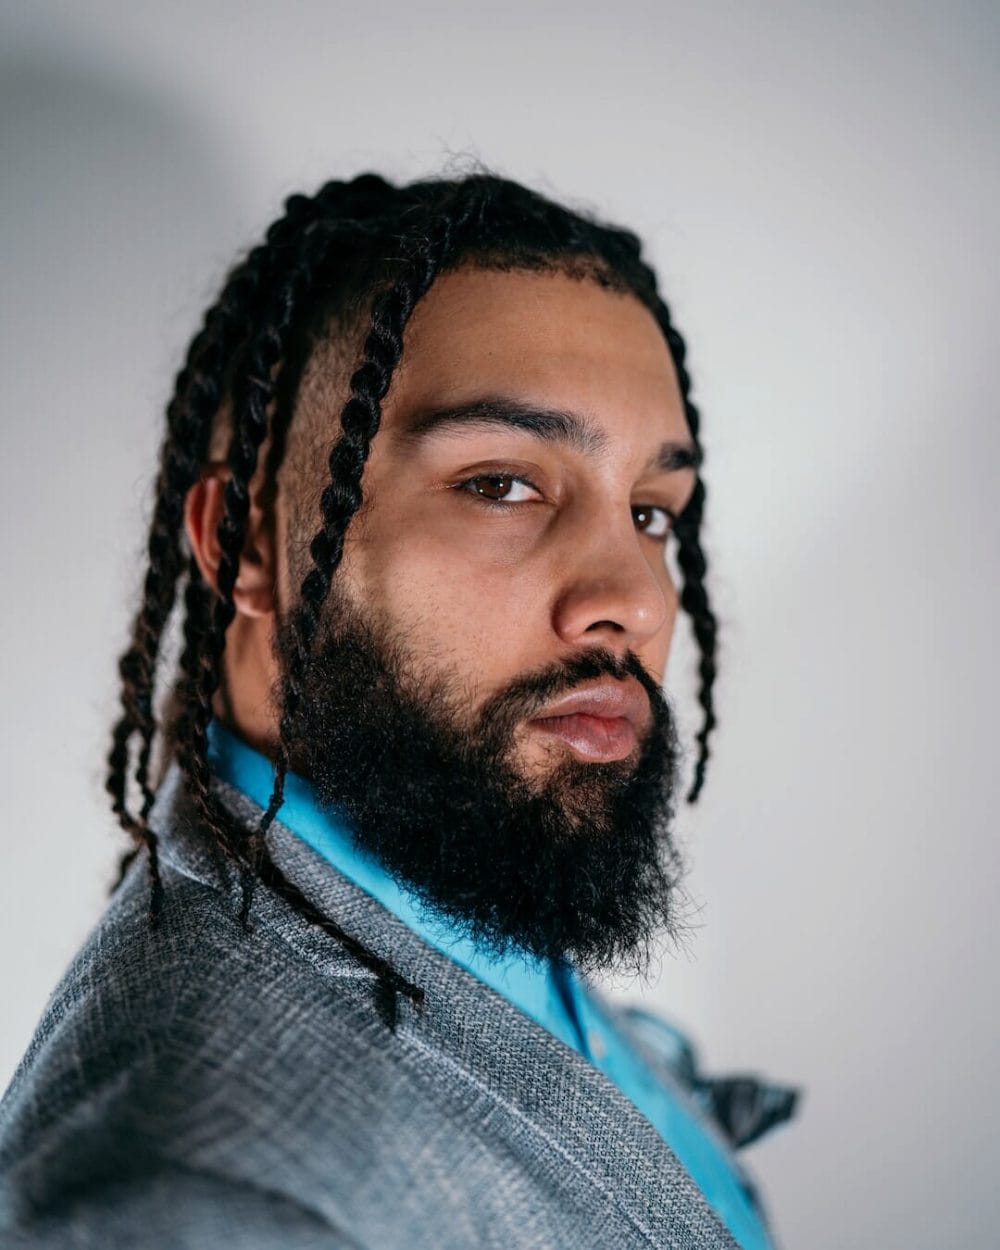 man with twists-style knotless braids and a beard, wearing a blue jacket on white background